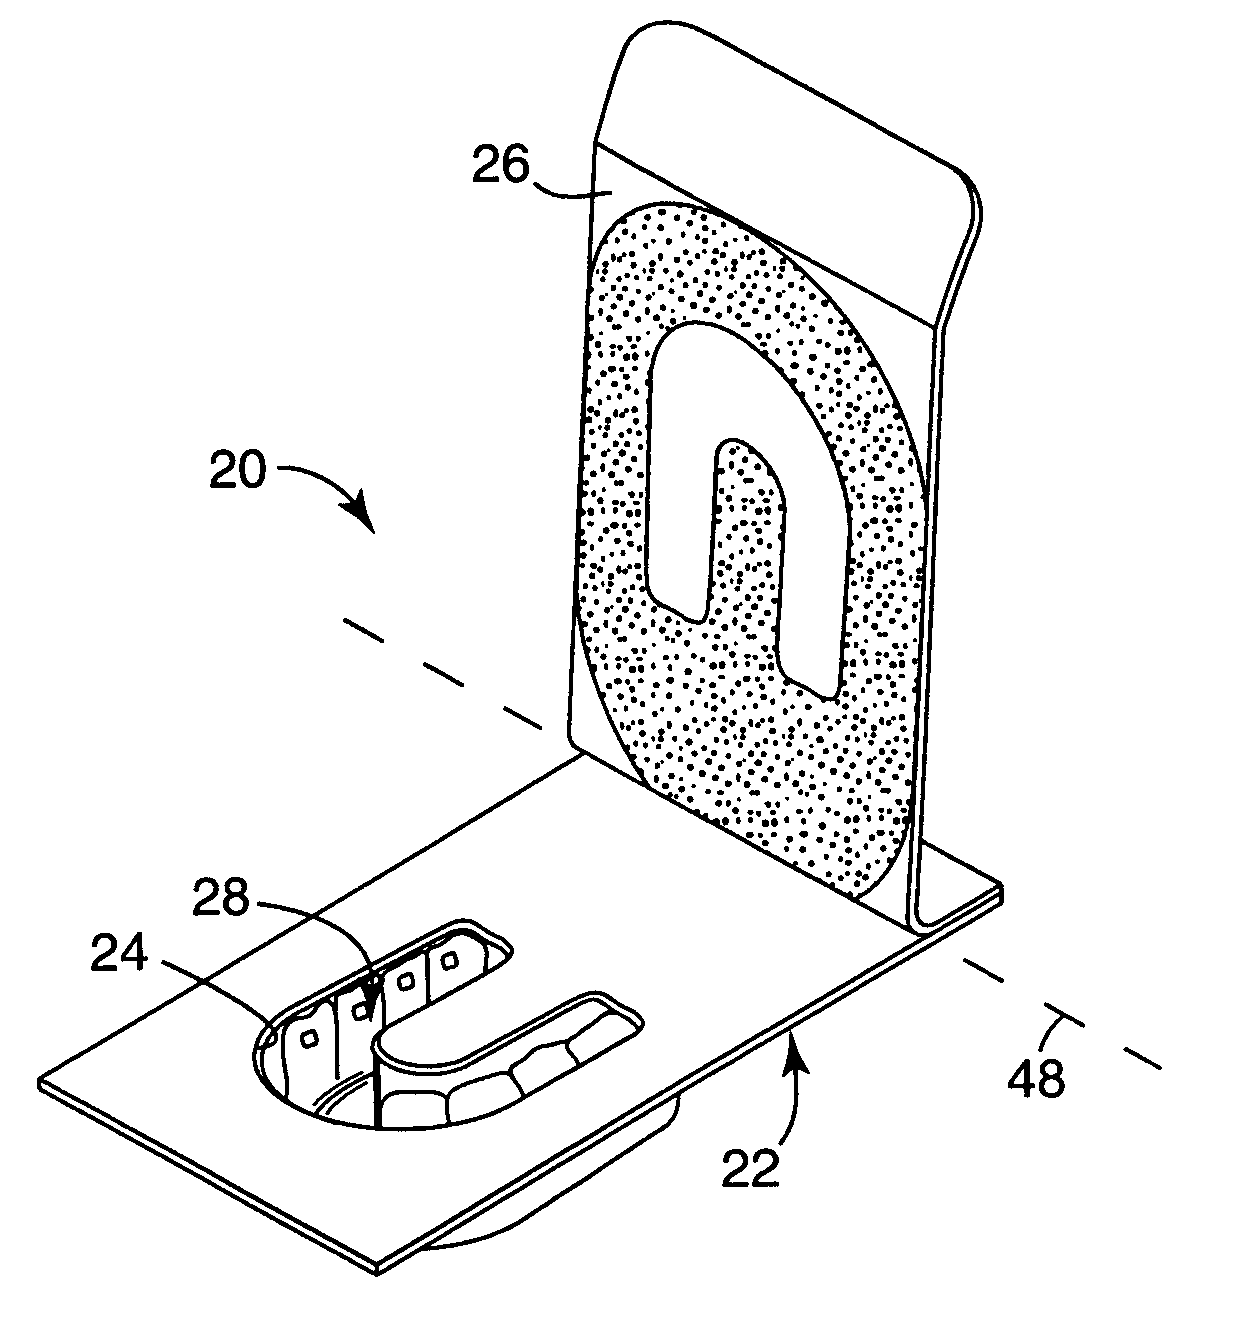 Apparatus for indirect bonding of orthodontic appliances and method of making the same